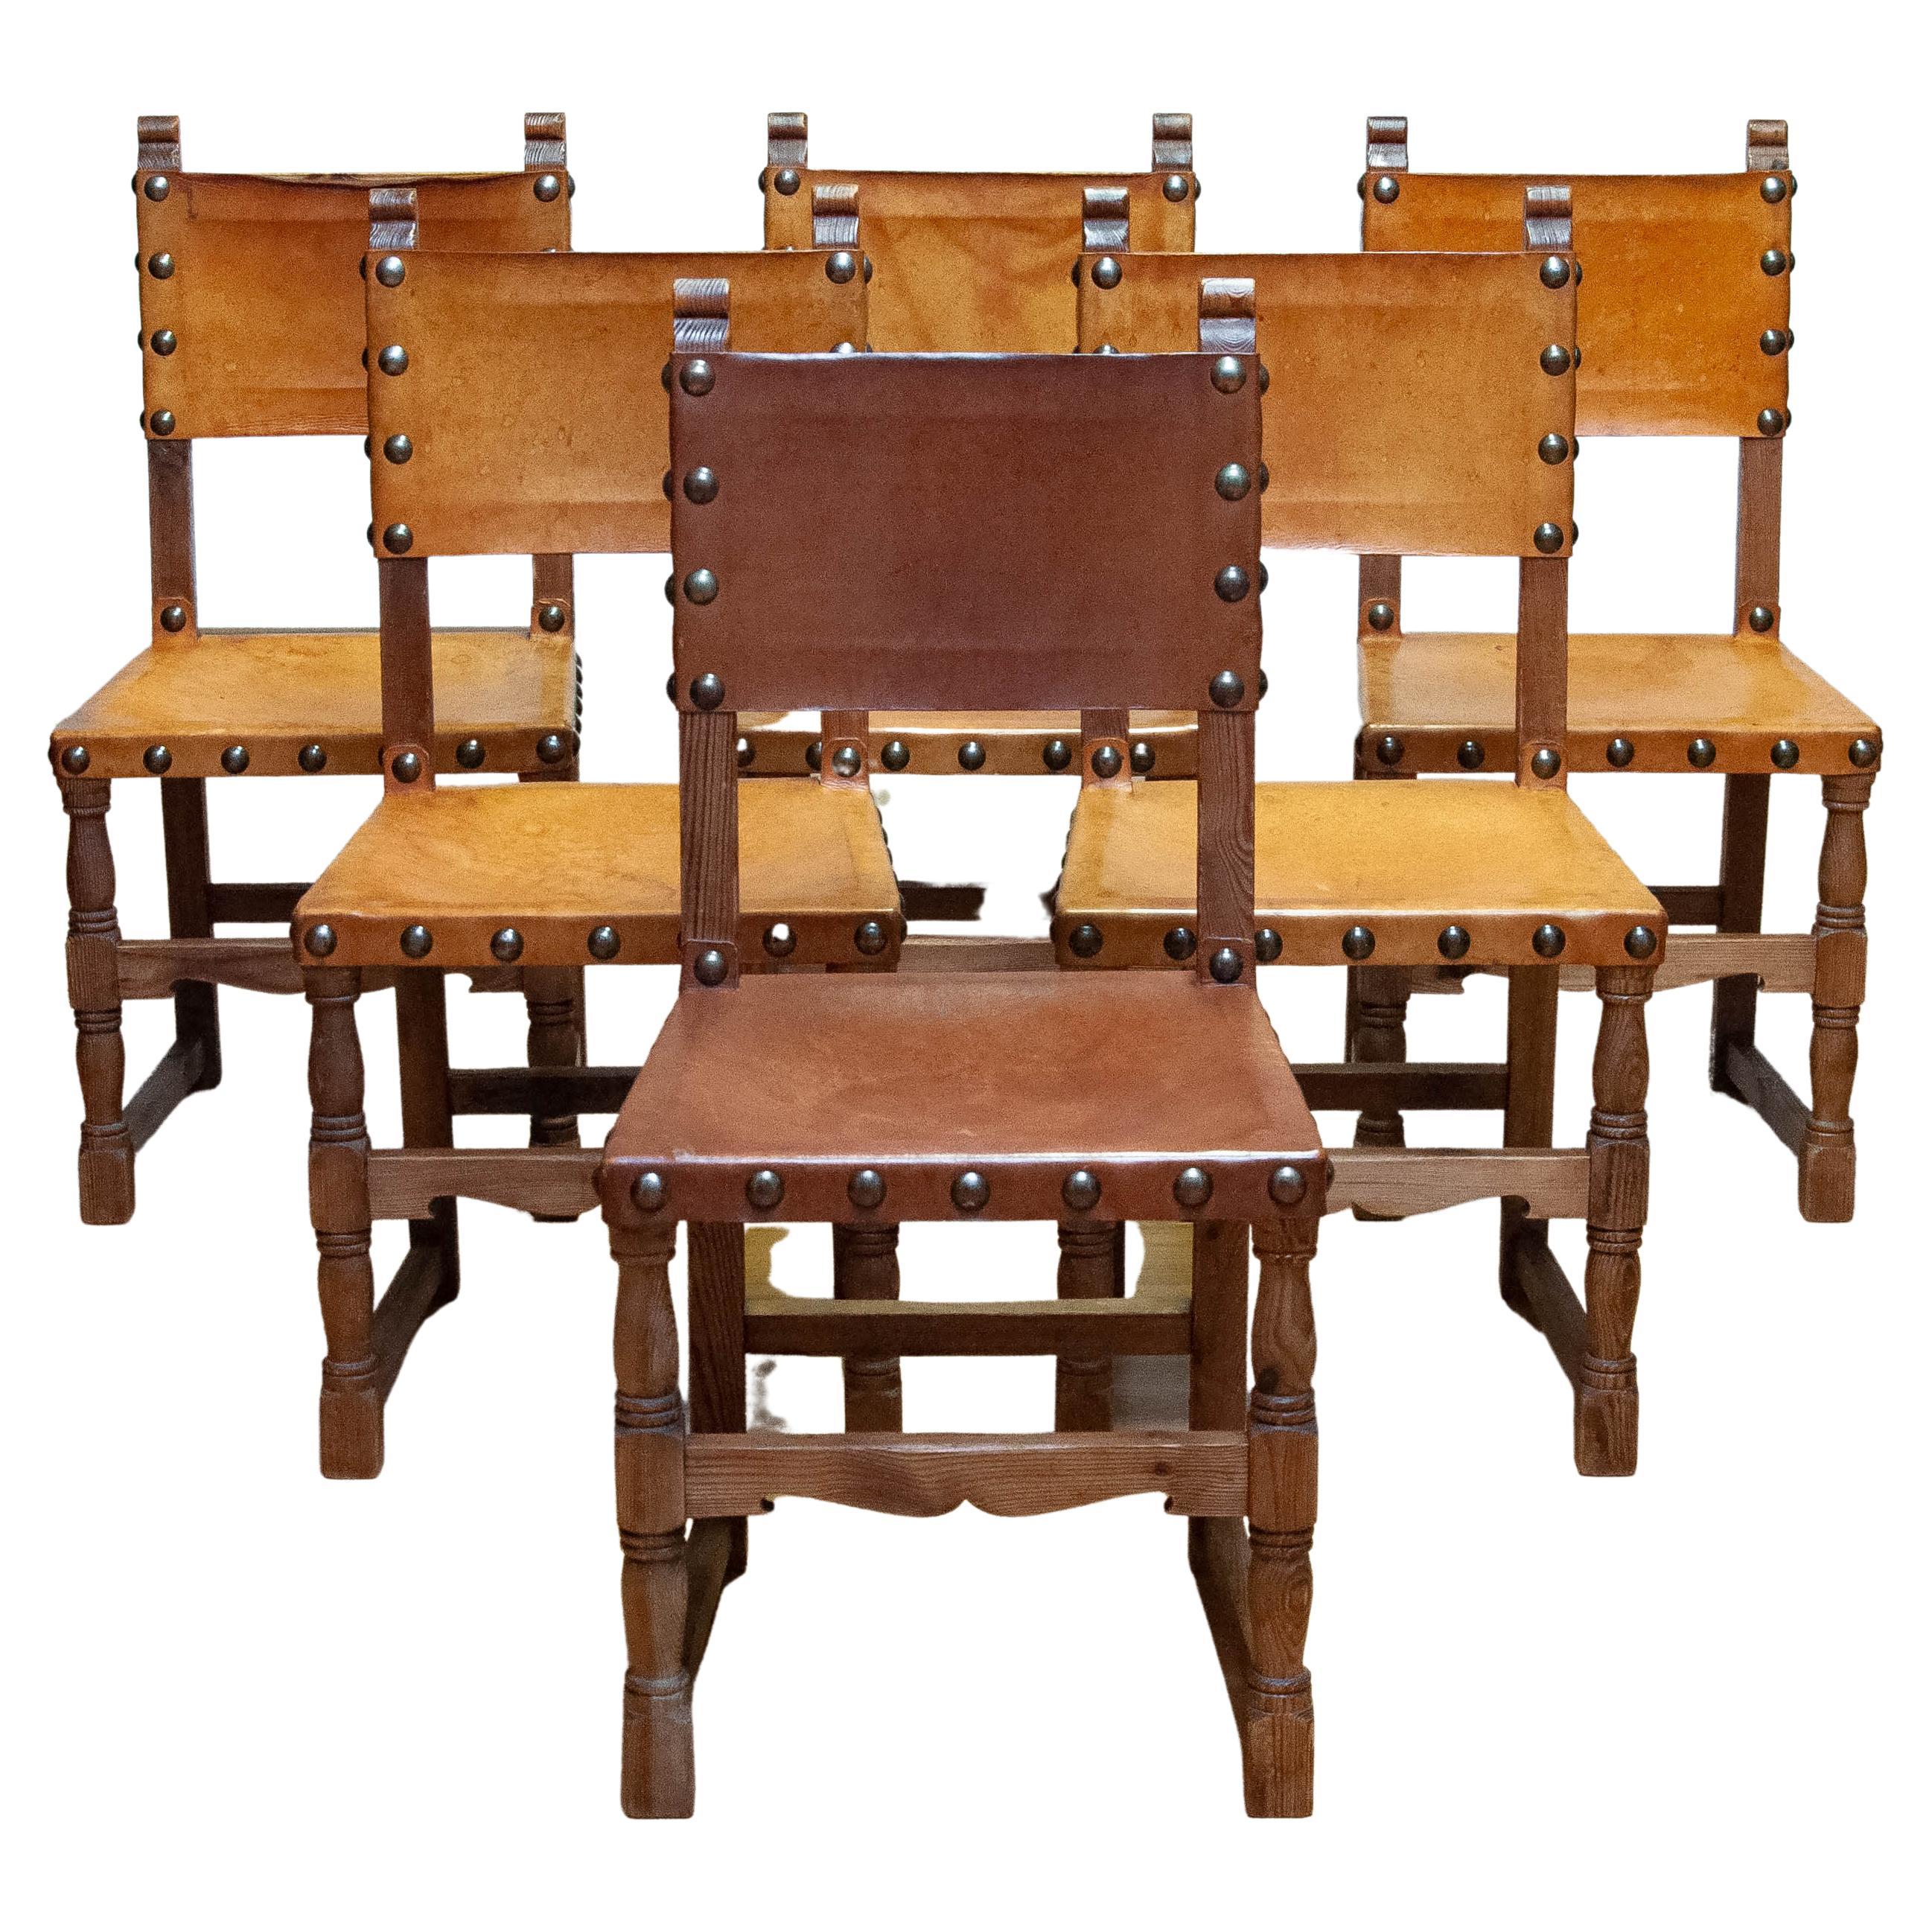 6 Antique Swedish Folk Art Farm County Dining Chairs In Pine And Tan Leather For Sale